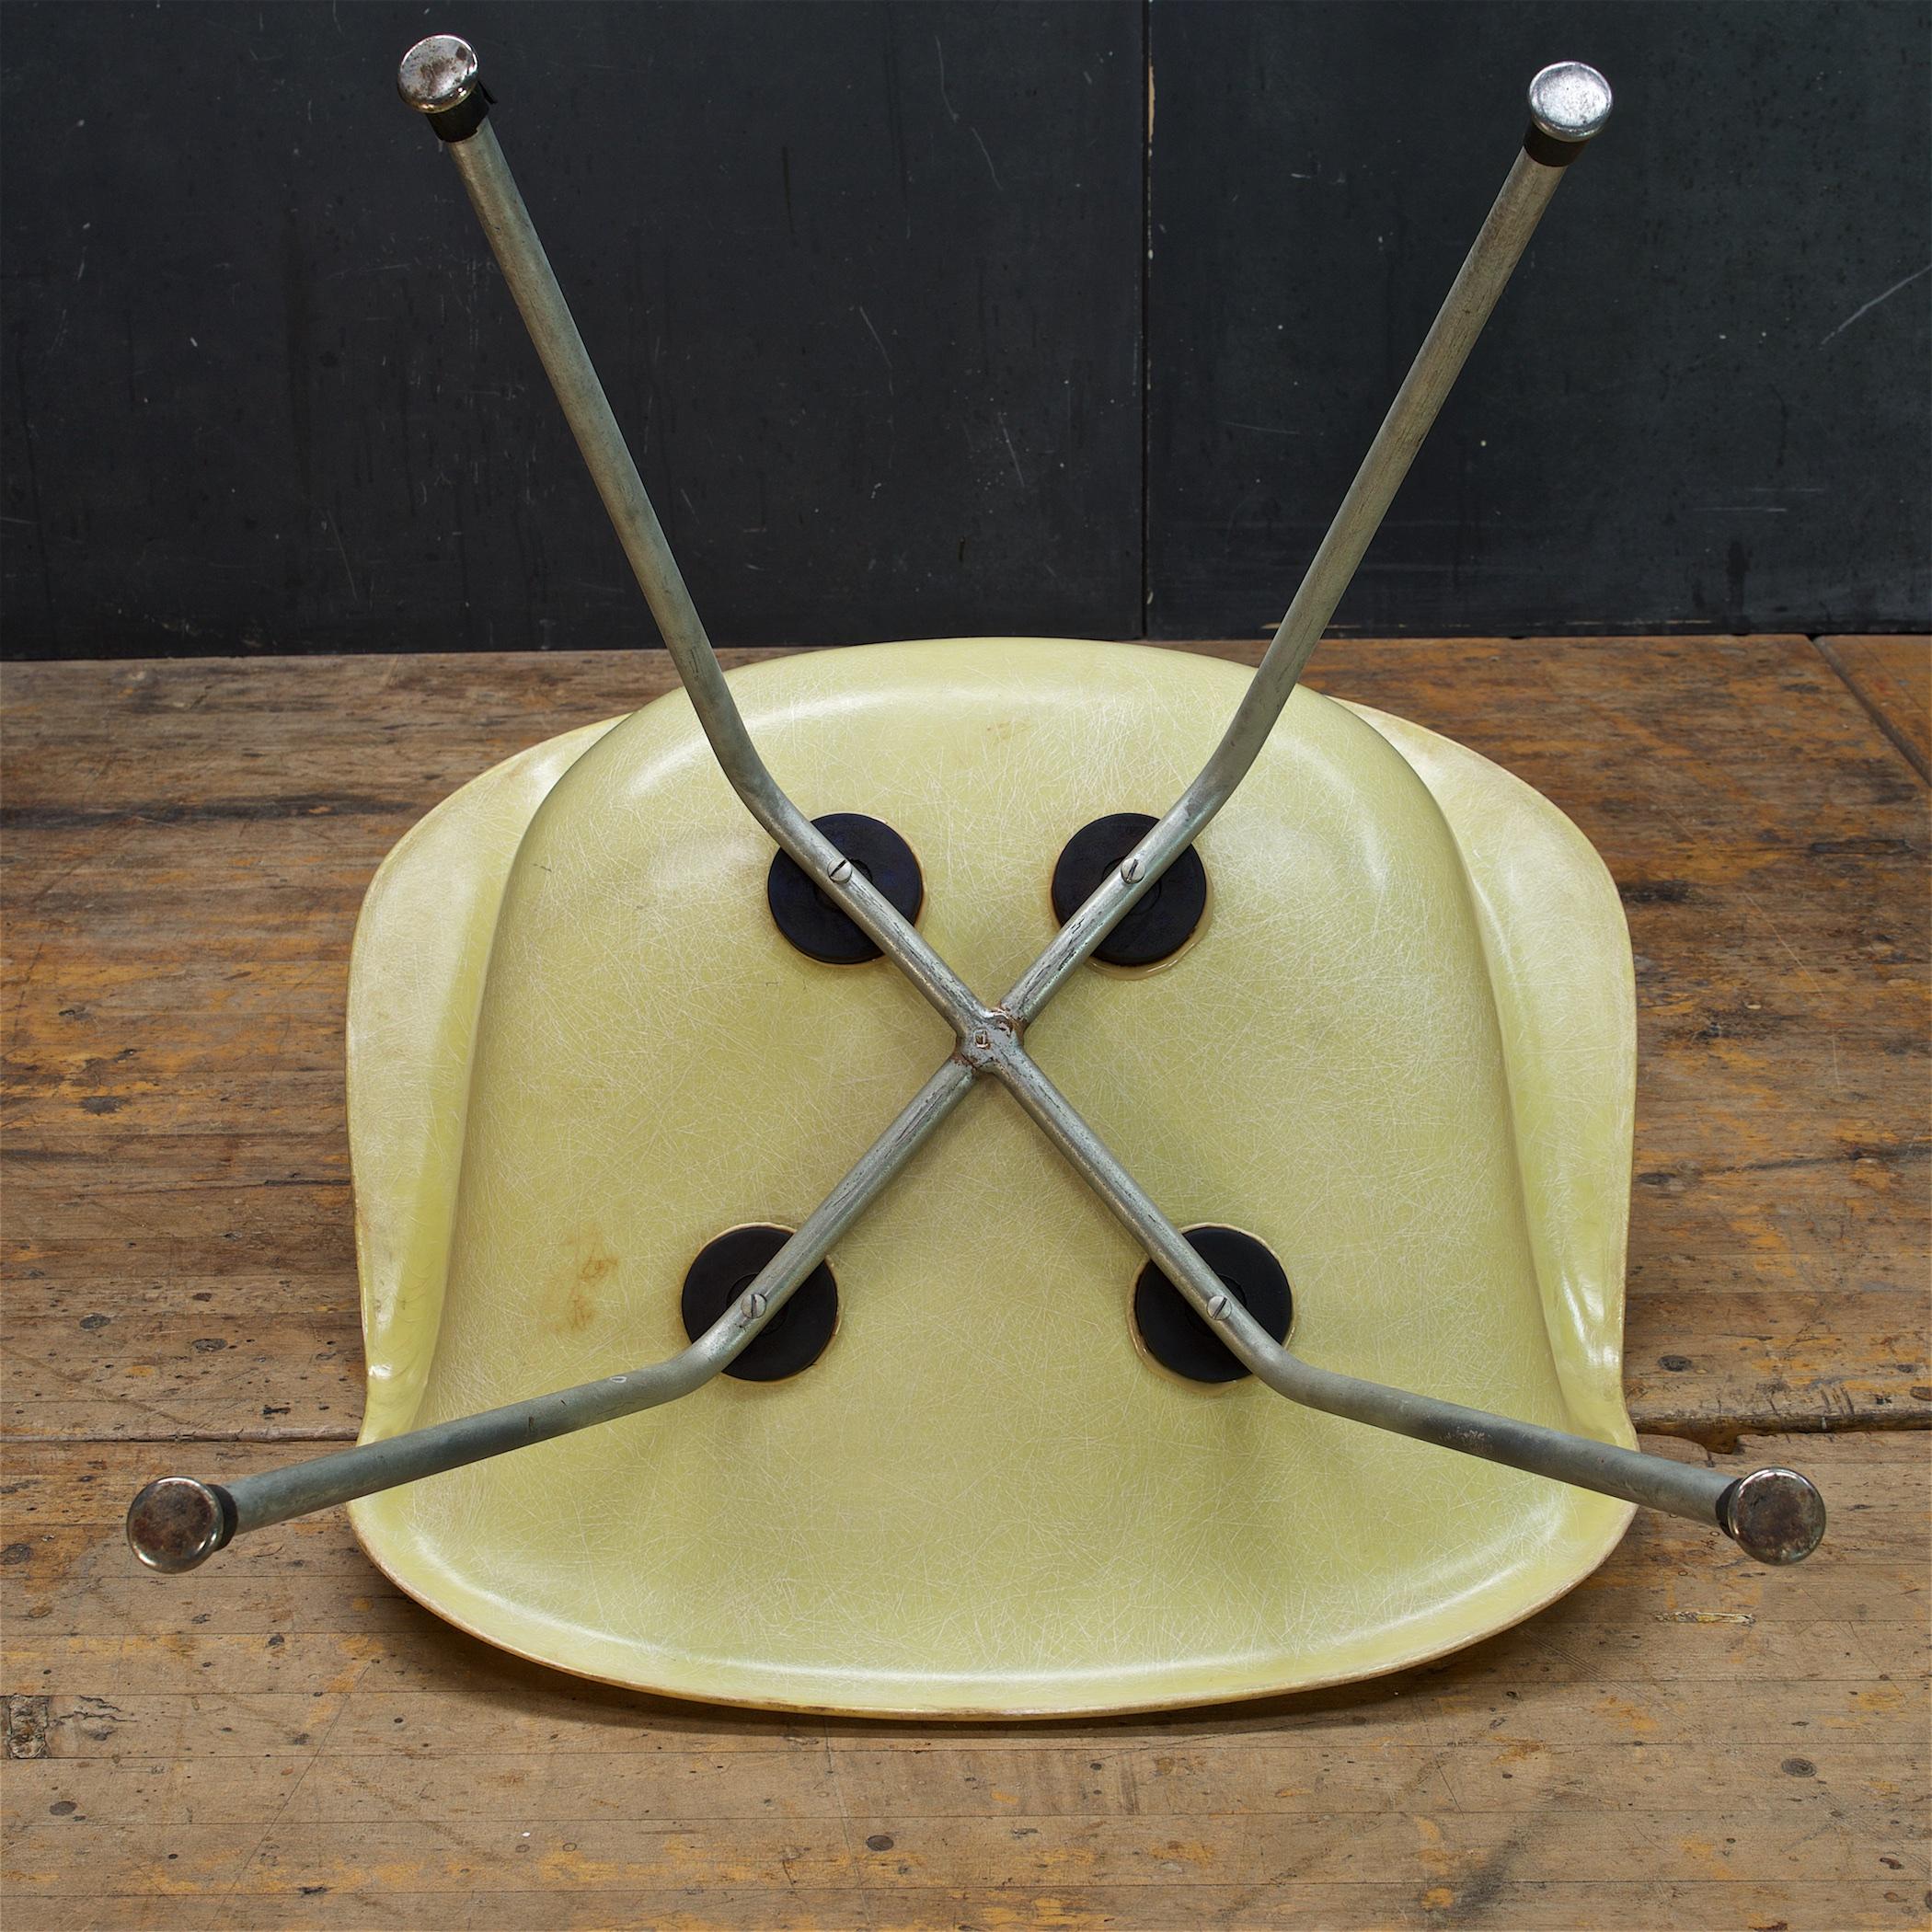 Machine-Made Vintage 1950s Lemon Yellow DAX Chair Charles+Ray Eames Zenith Herman Miller For Sale